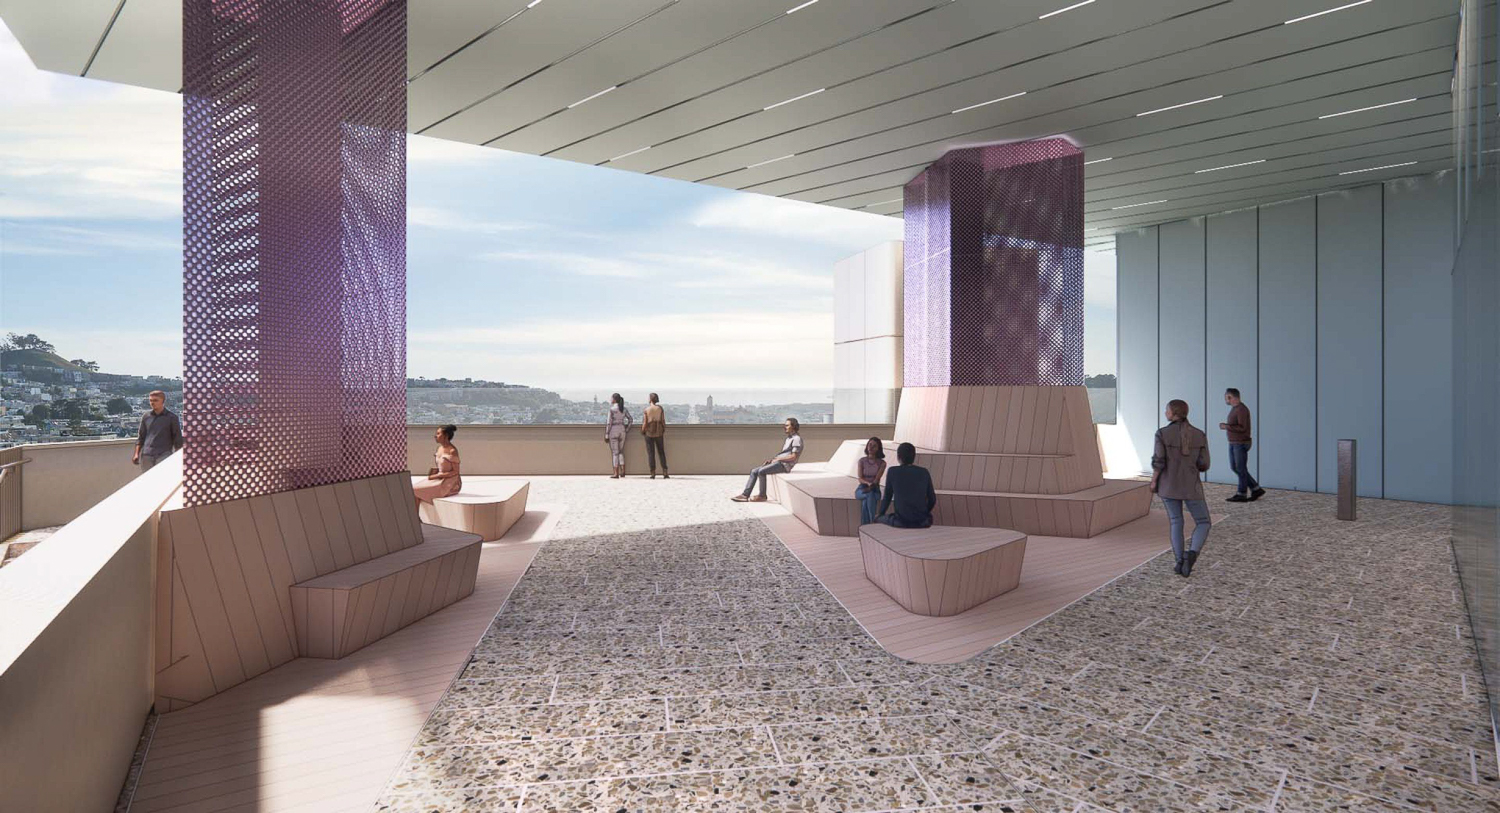 Parnassus Research and Academic Building overlook, rendering by Snøhetta